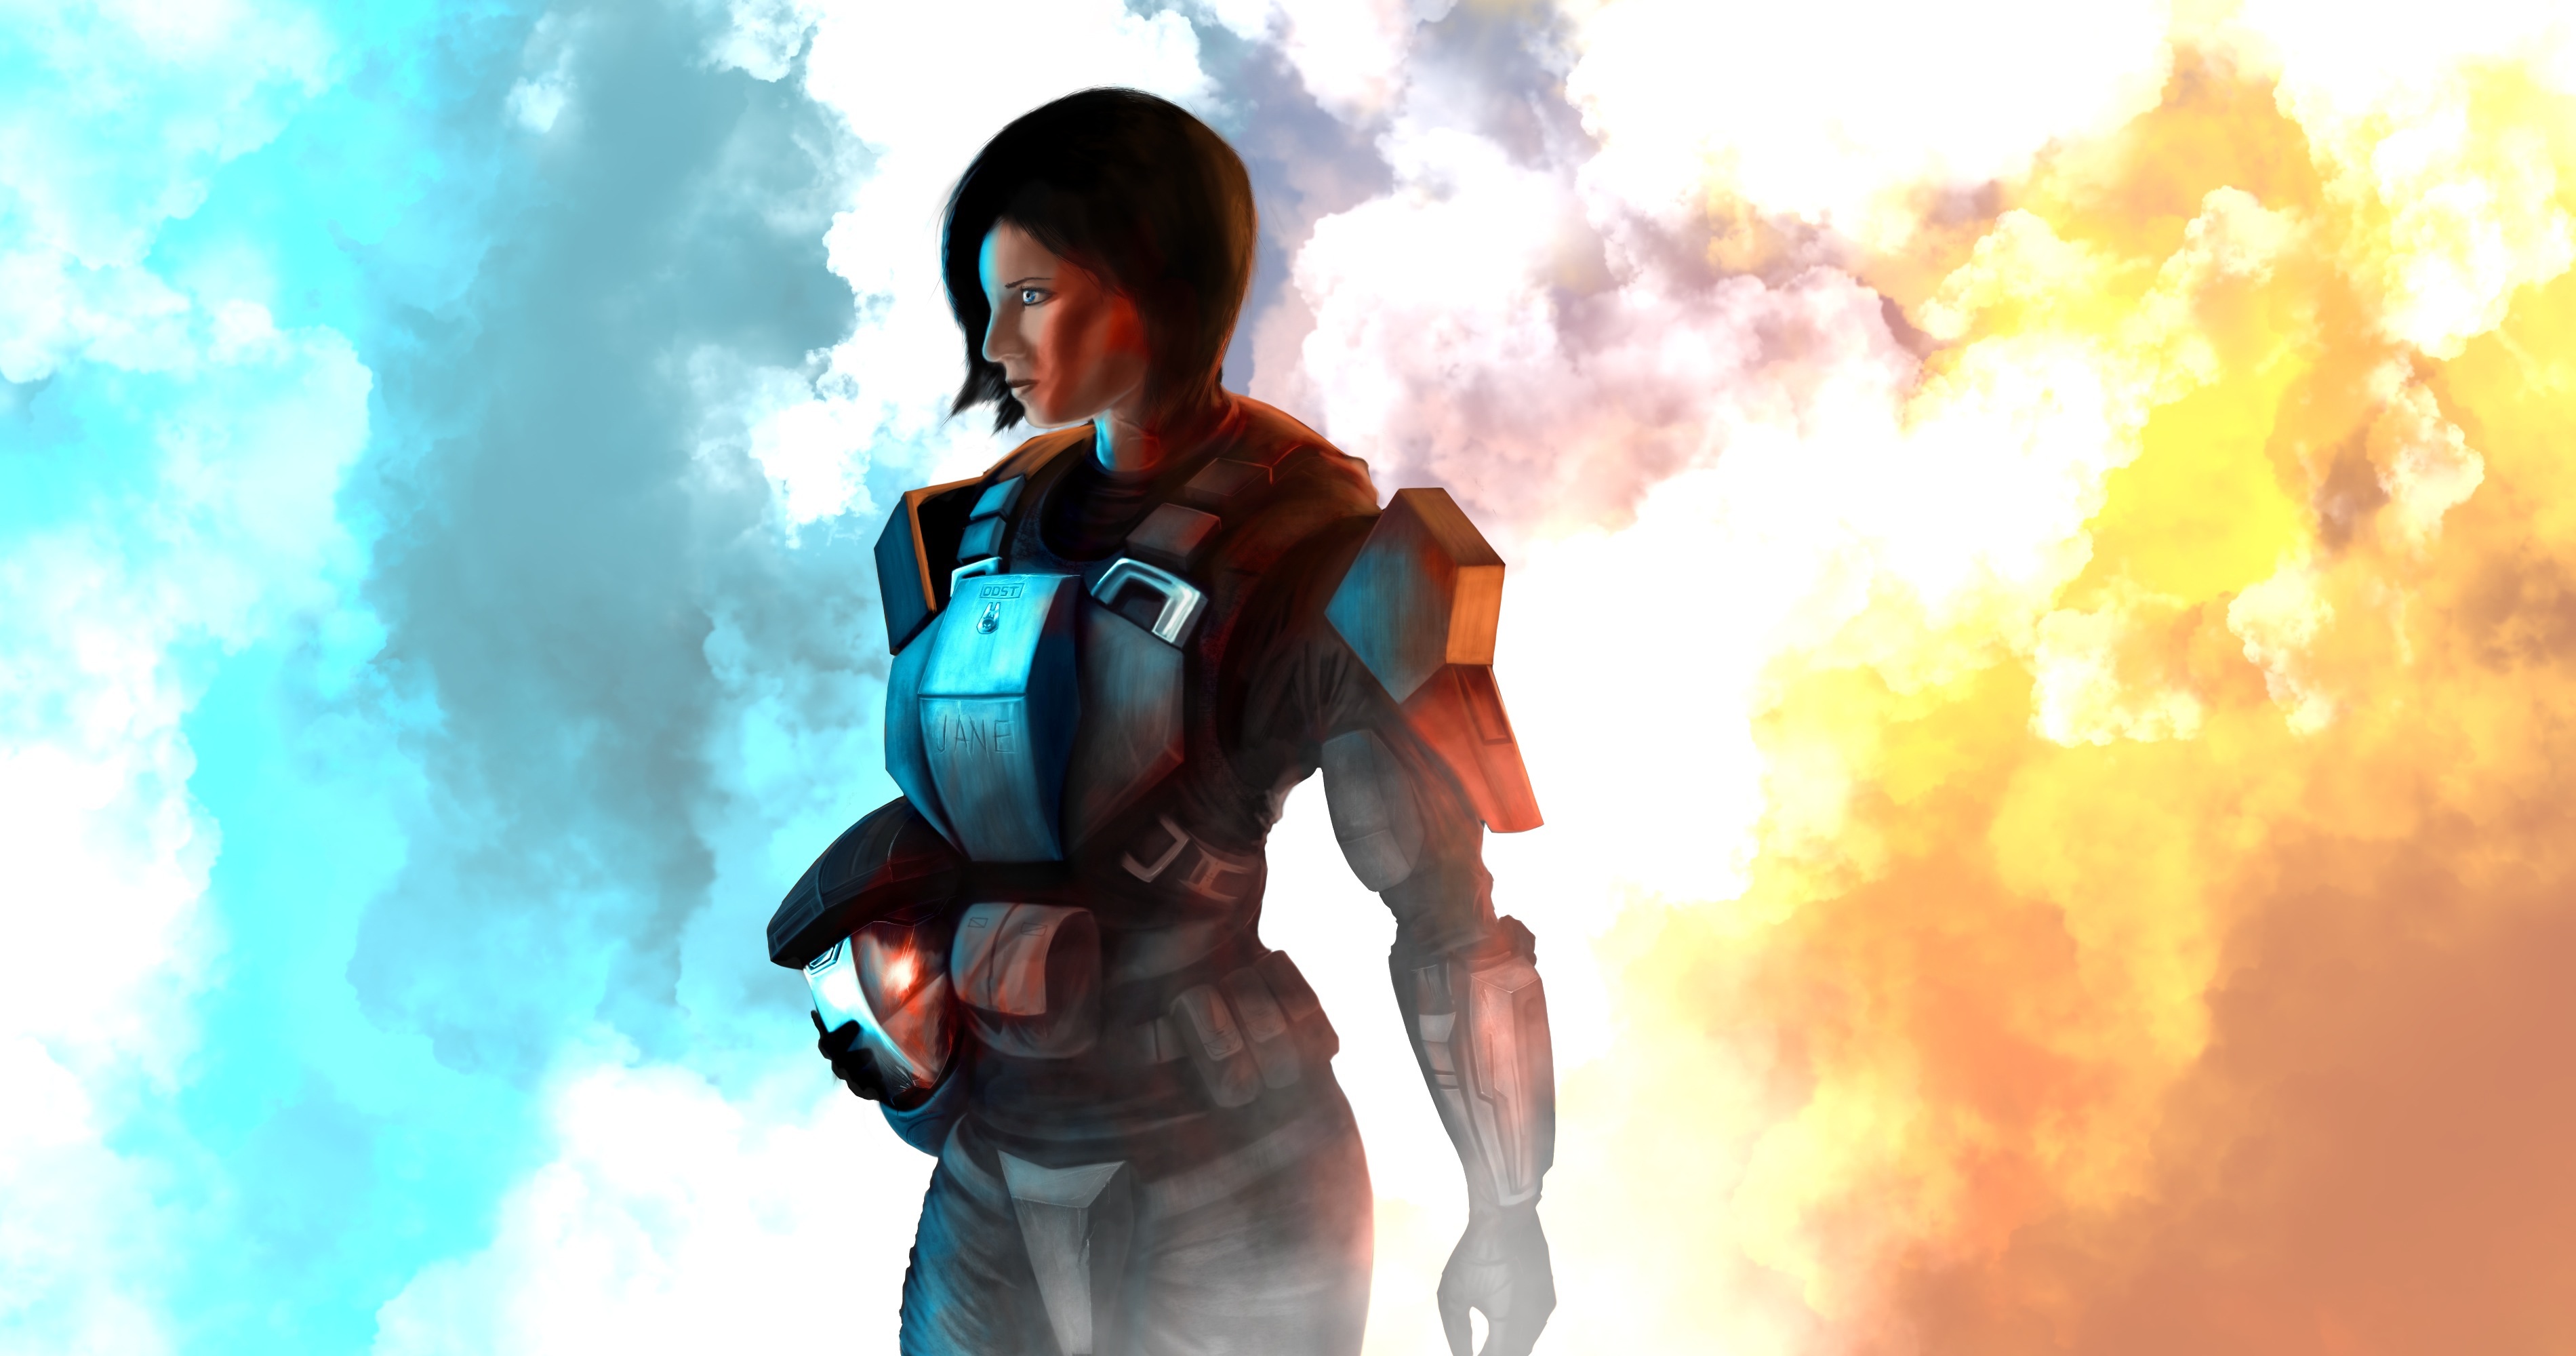 Jane the ODST